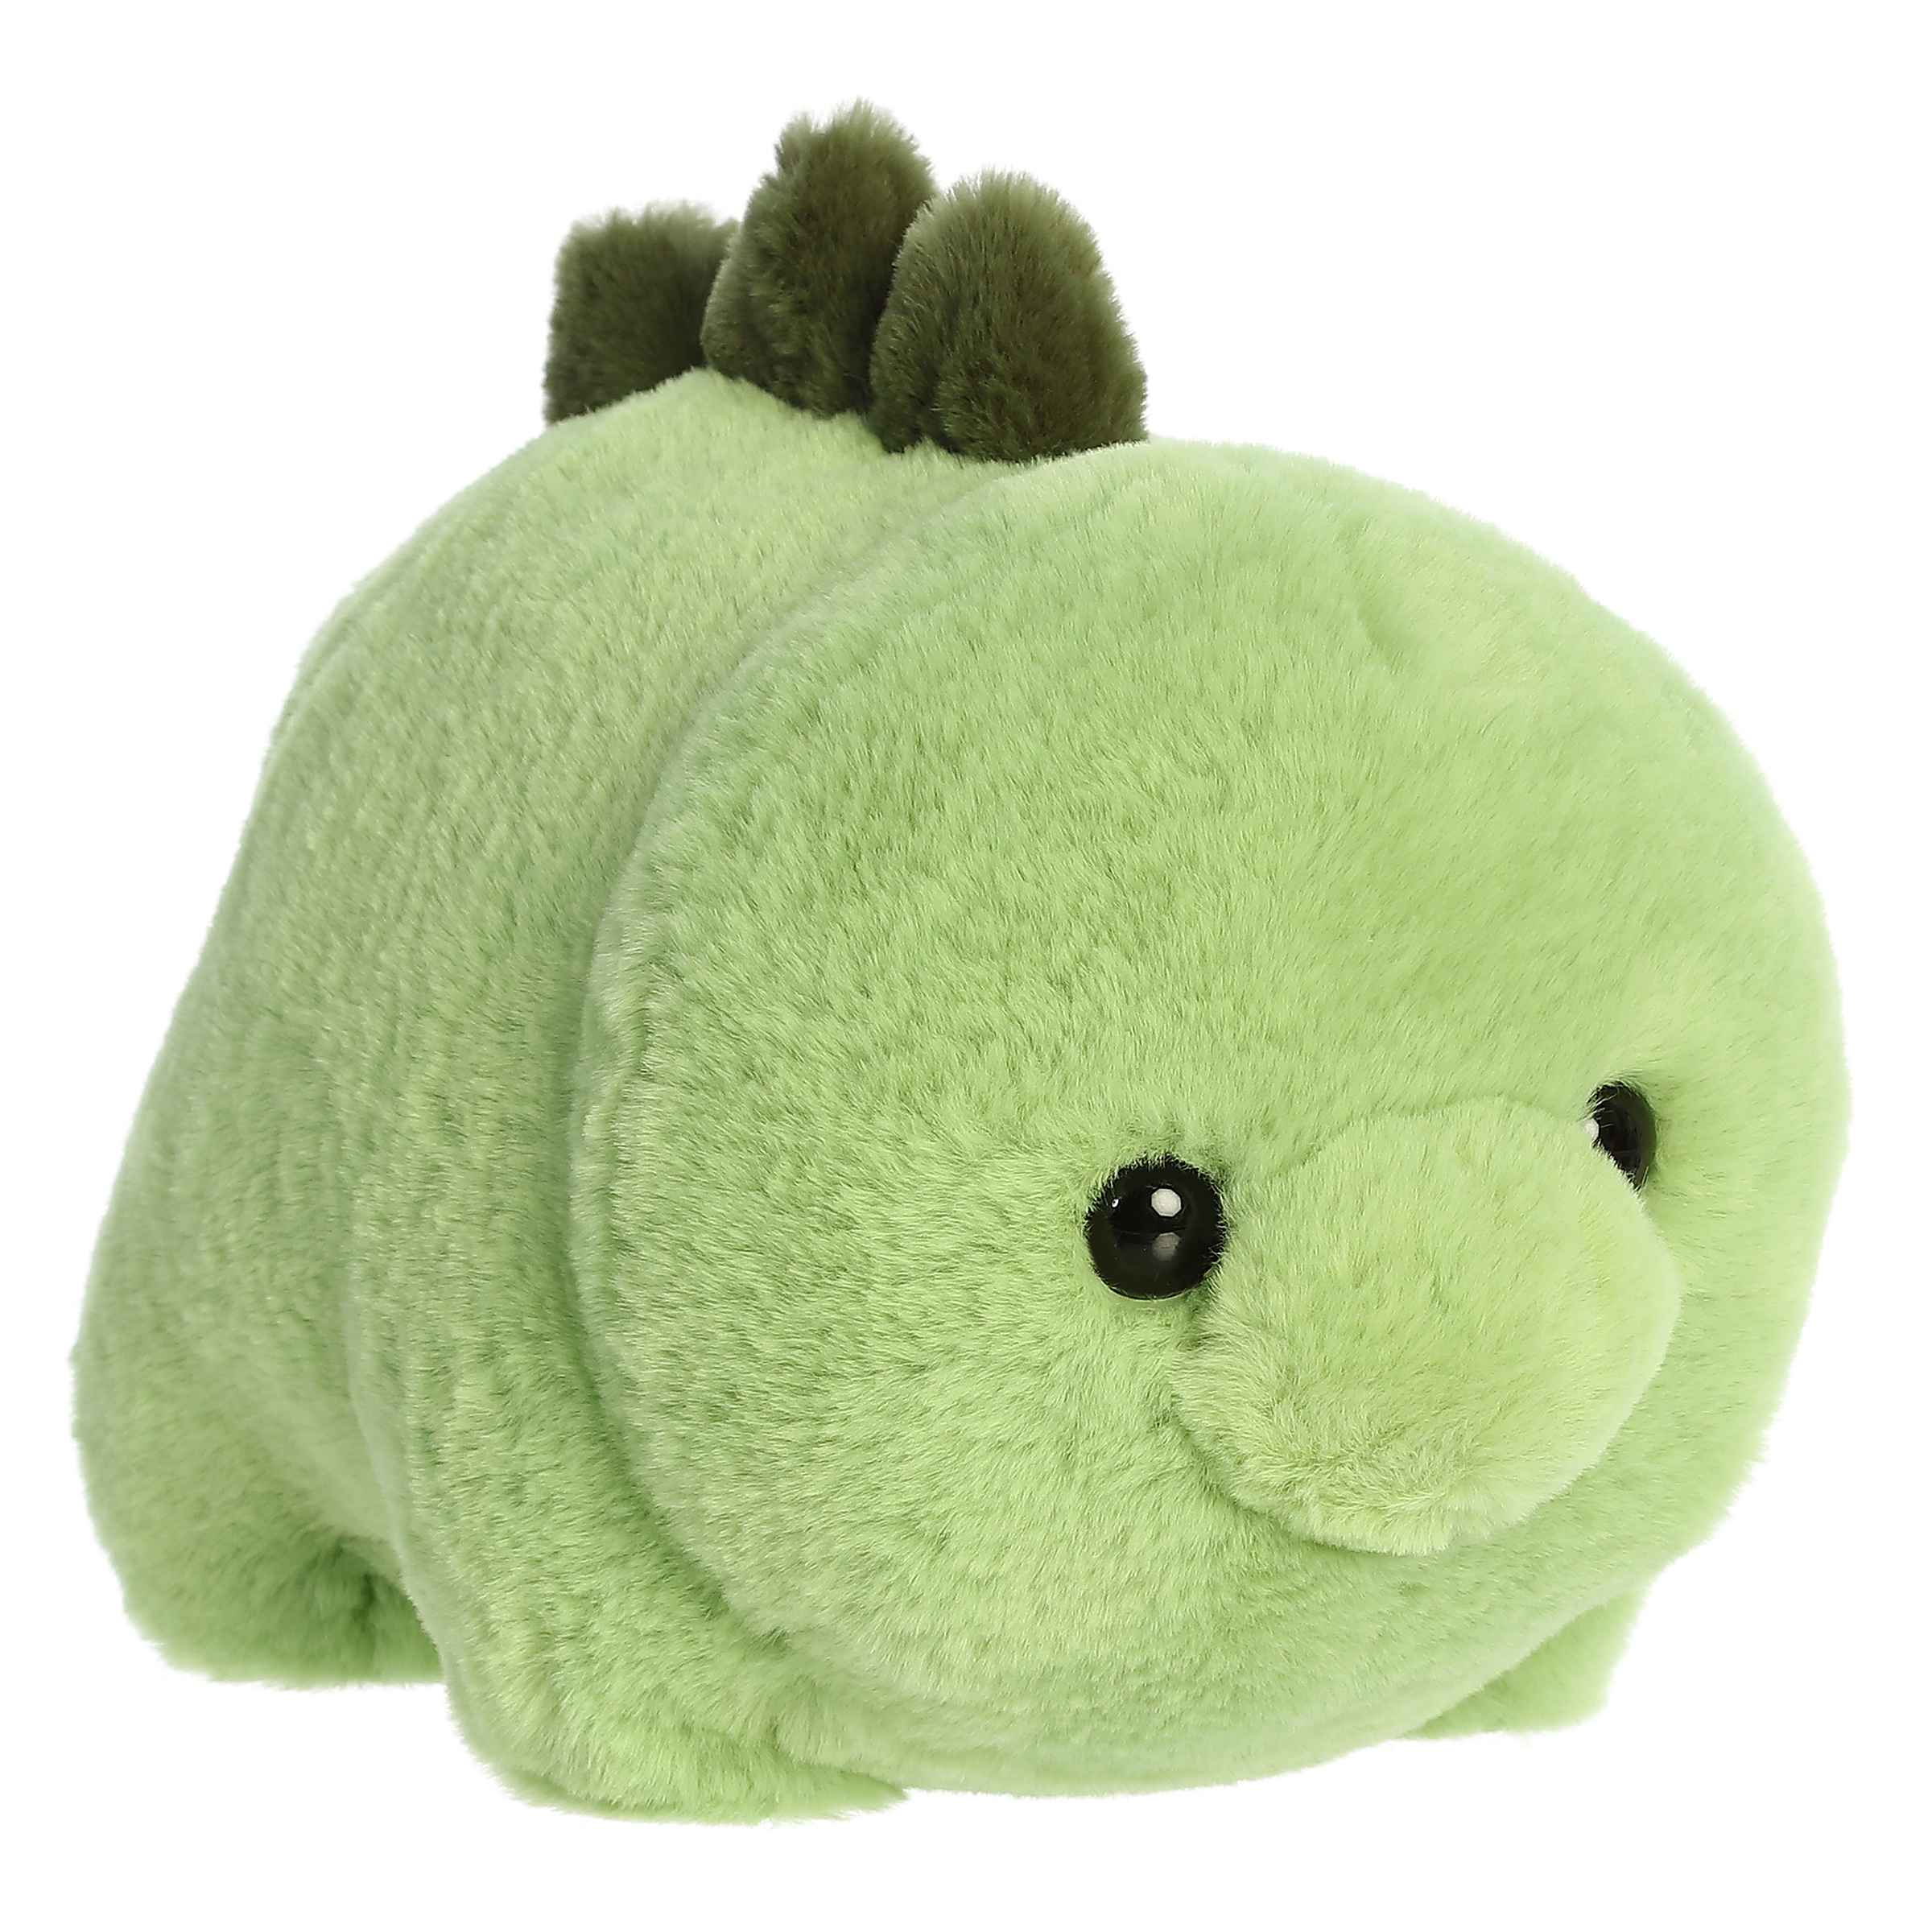 Stevie Stegosaurus plush from Spudsters, green with soft spikes, dinosaur adventure